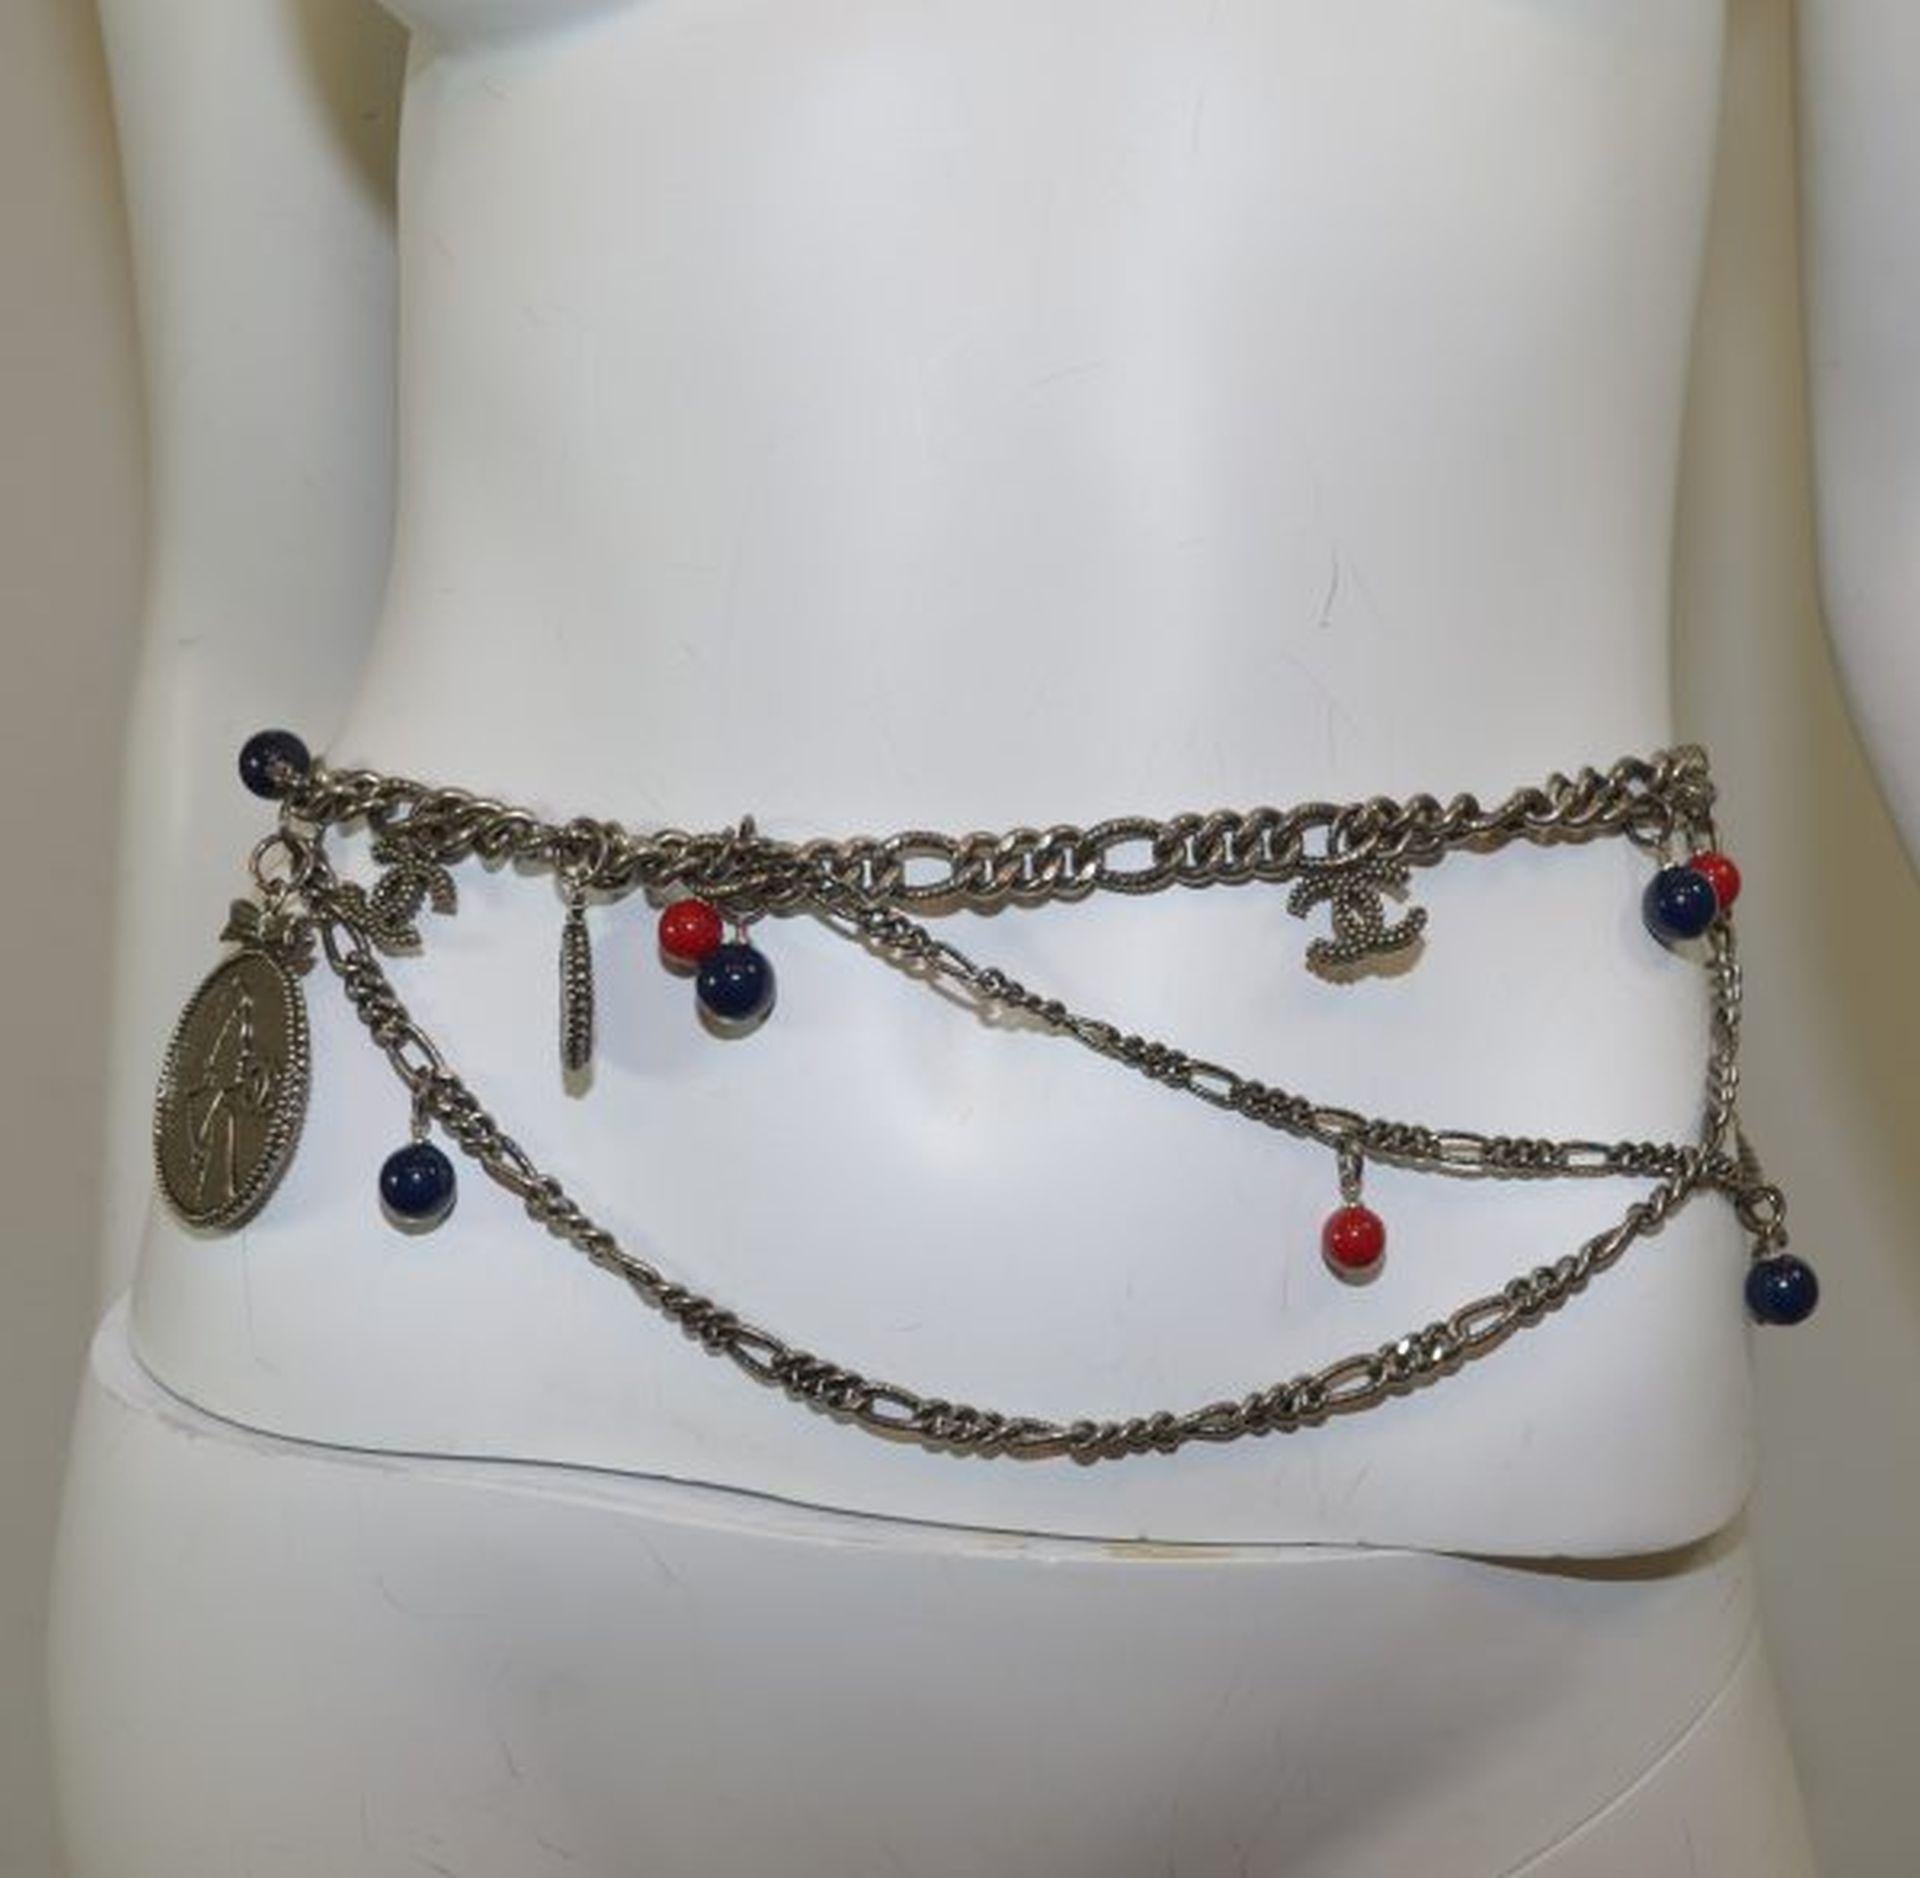 Chanel belt from 2004 Autumn Collection featured in pewter-tone hardware with assorted Coco Chanel silhouette and quote charms, adorned with red and navy blue beads, and signature CC logo charms. Belt is made in France. Excellent